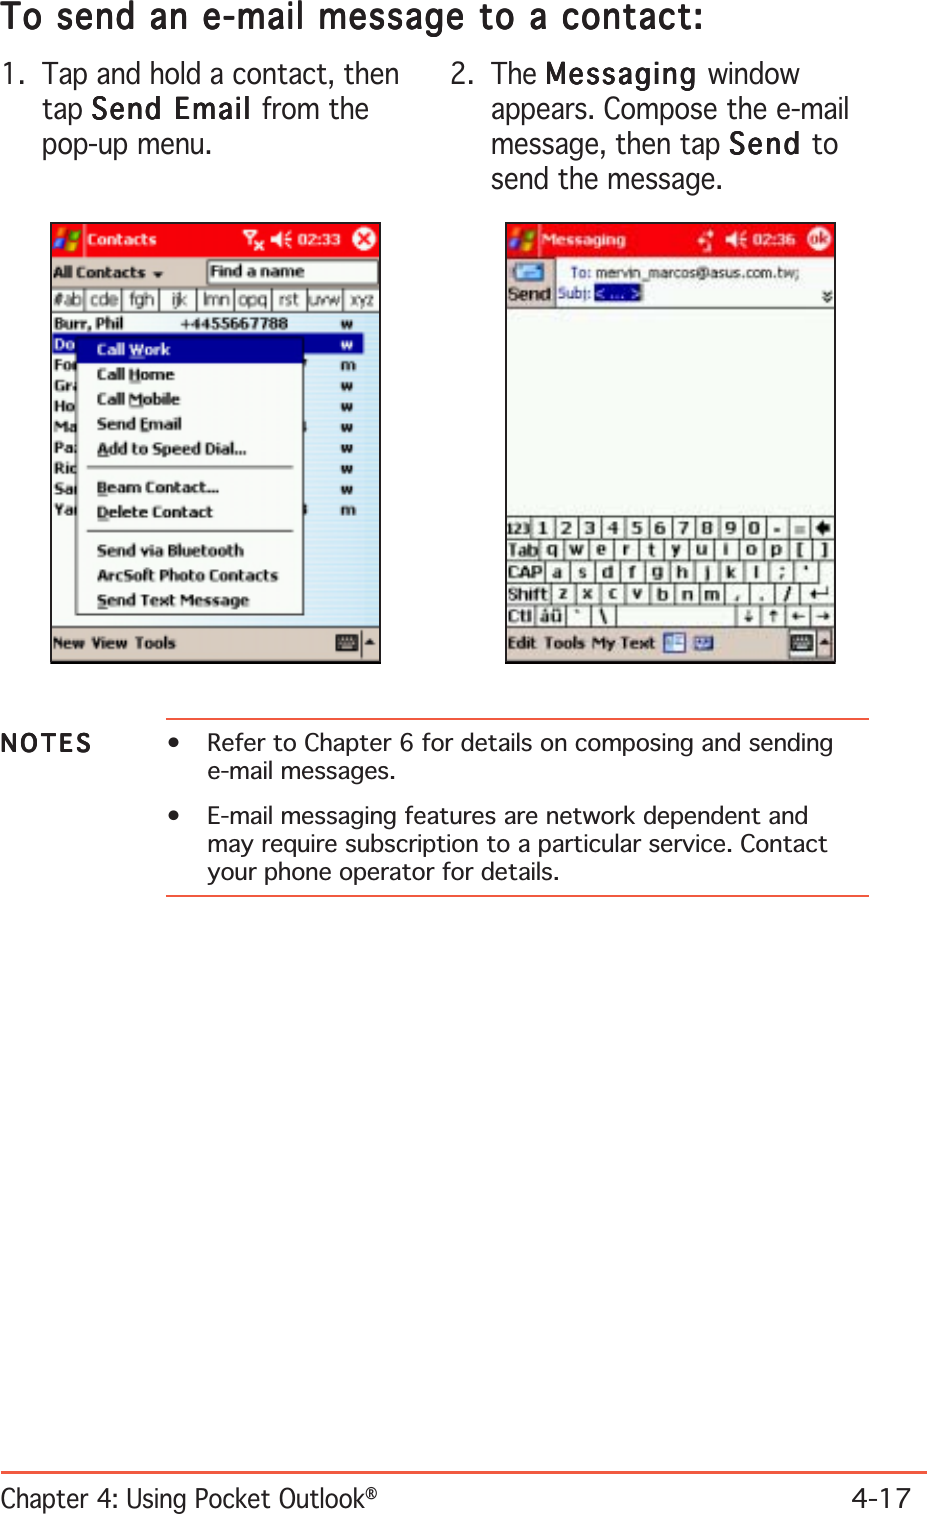 Chapter 4: Using Pocket Outlook®4-17To send an e-mail message to a contact:To send an e-mail message to a contact:To send an e-mail message to a contact:To send an e-mail message to a contact:To send an e-mail message to a contact:1. Tap and hold a contact, thentap Send Email Send Email Send Email Send Email Send Email from thepop-up menu.2. The MessagingMessagingMessagingMessagingMessaging windowappears. Compose the e-mailmessage, then tap SendSendSendSendSend tosend the message.NOTESNOTESNOTESNOTESN O T E S • Refer to Chapter 6 for details on composing and sendinge-mail messages.• E-mail messaging features are network dependent andmay require subscription to a particular service. Contactyour phone operator for details.